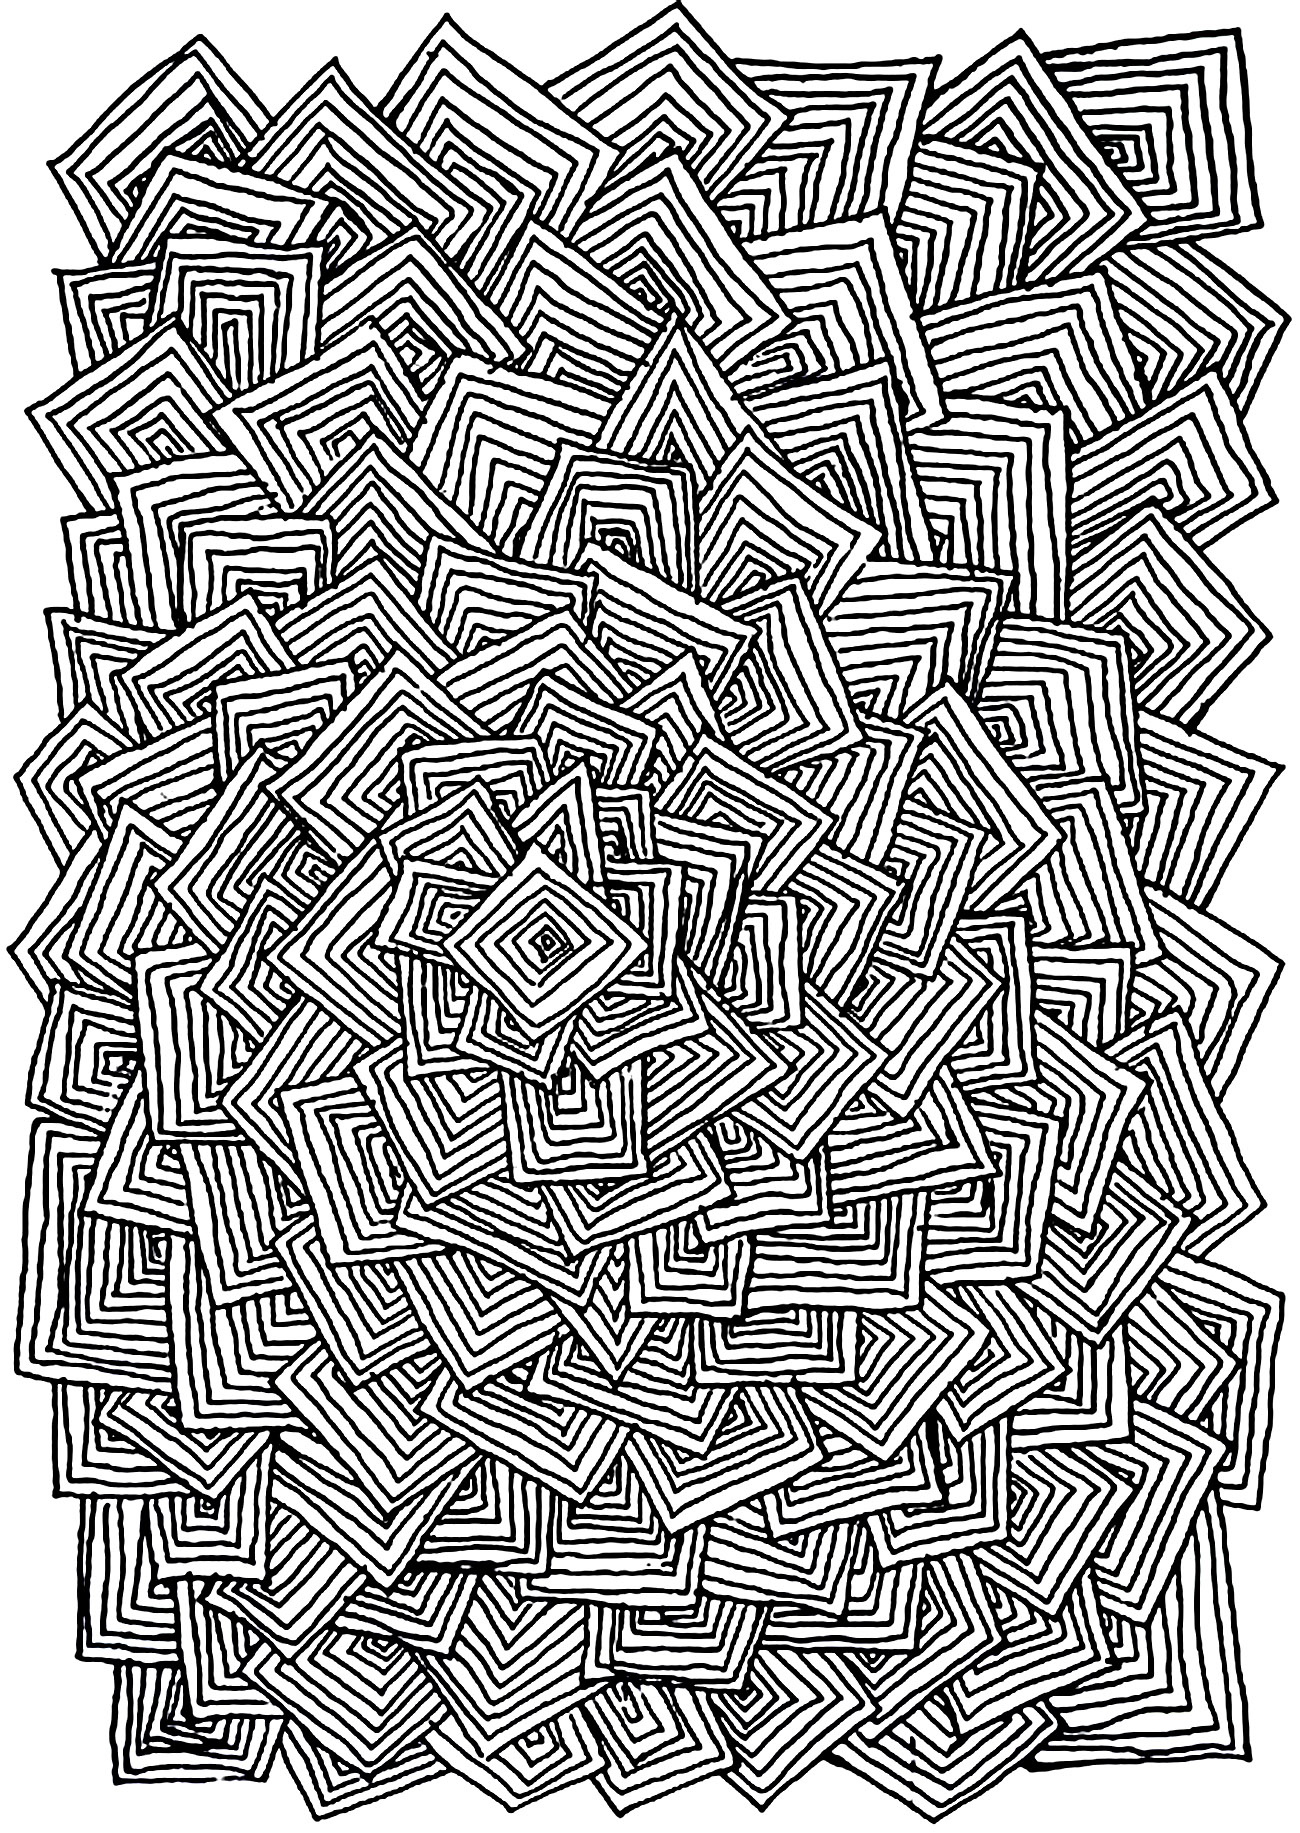 Relax squares - Anti stress Adult Coloring Pages - Page 2/